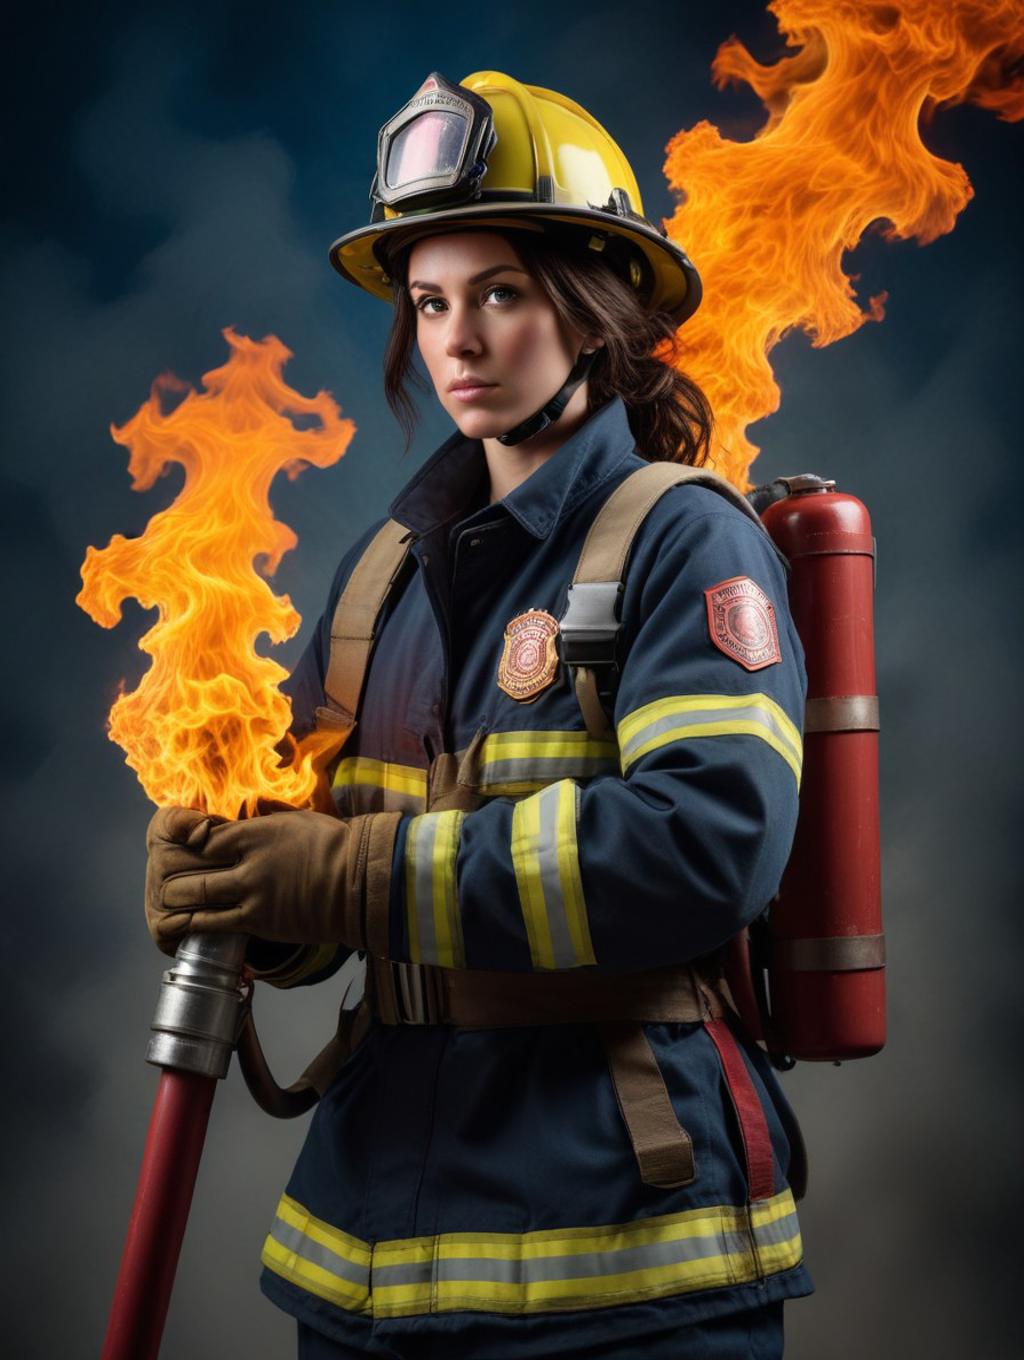 Fire Fighters Women: Portrait Photography & Wall Frames-Theme:6